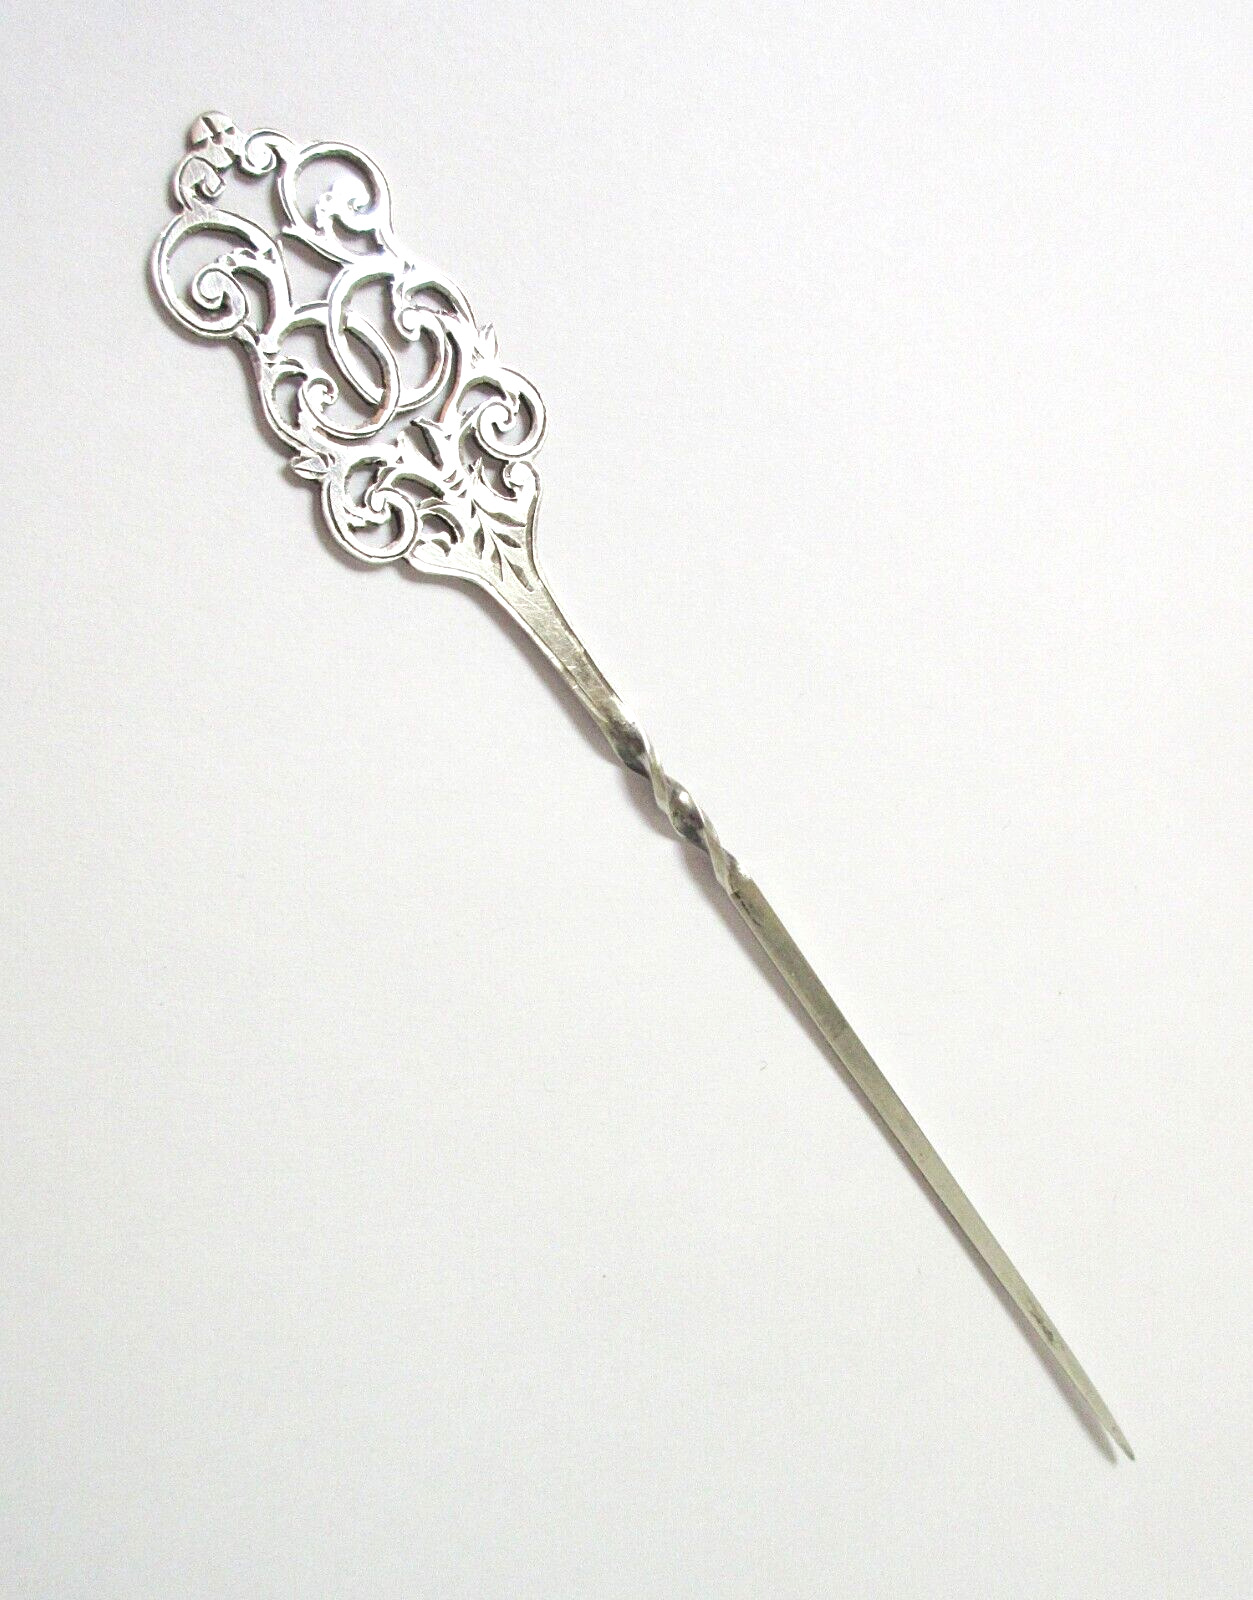 Antique Engraved Sterling Silver Hairpin